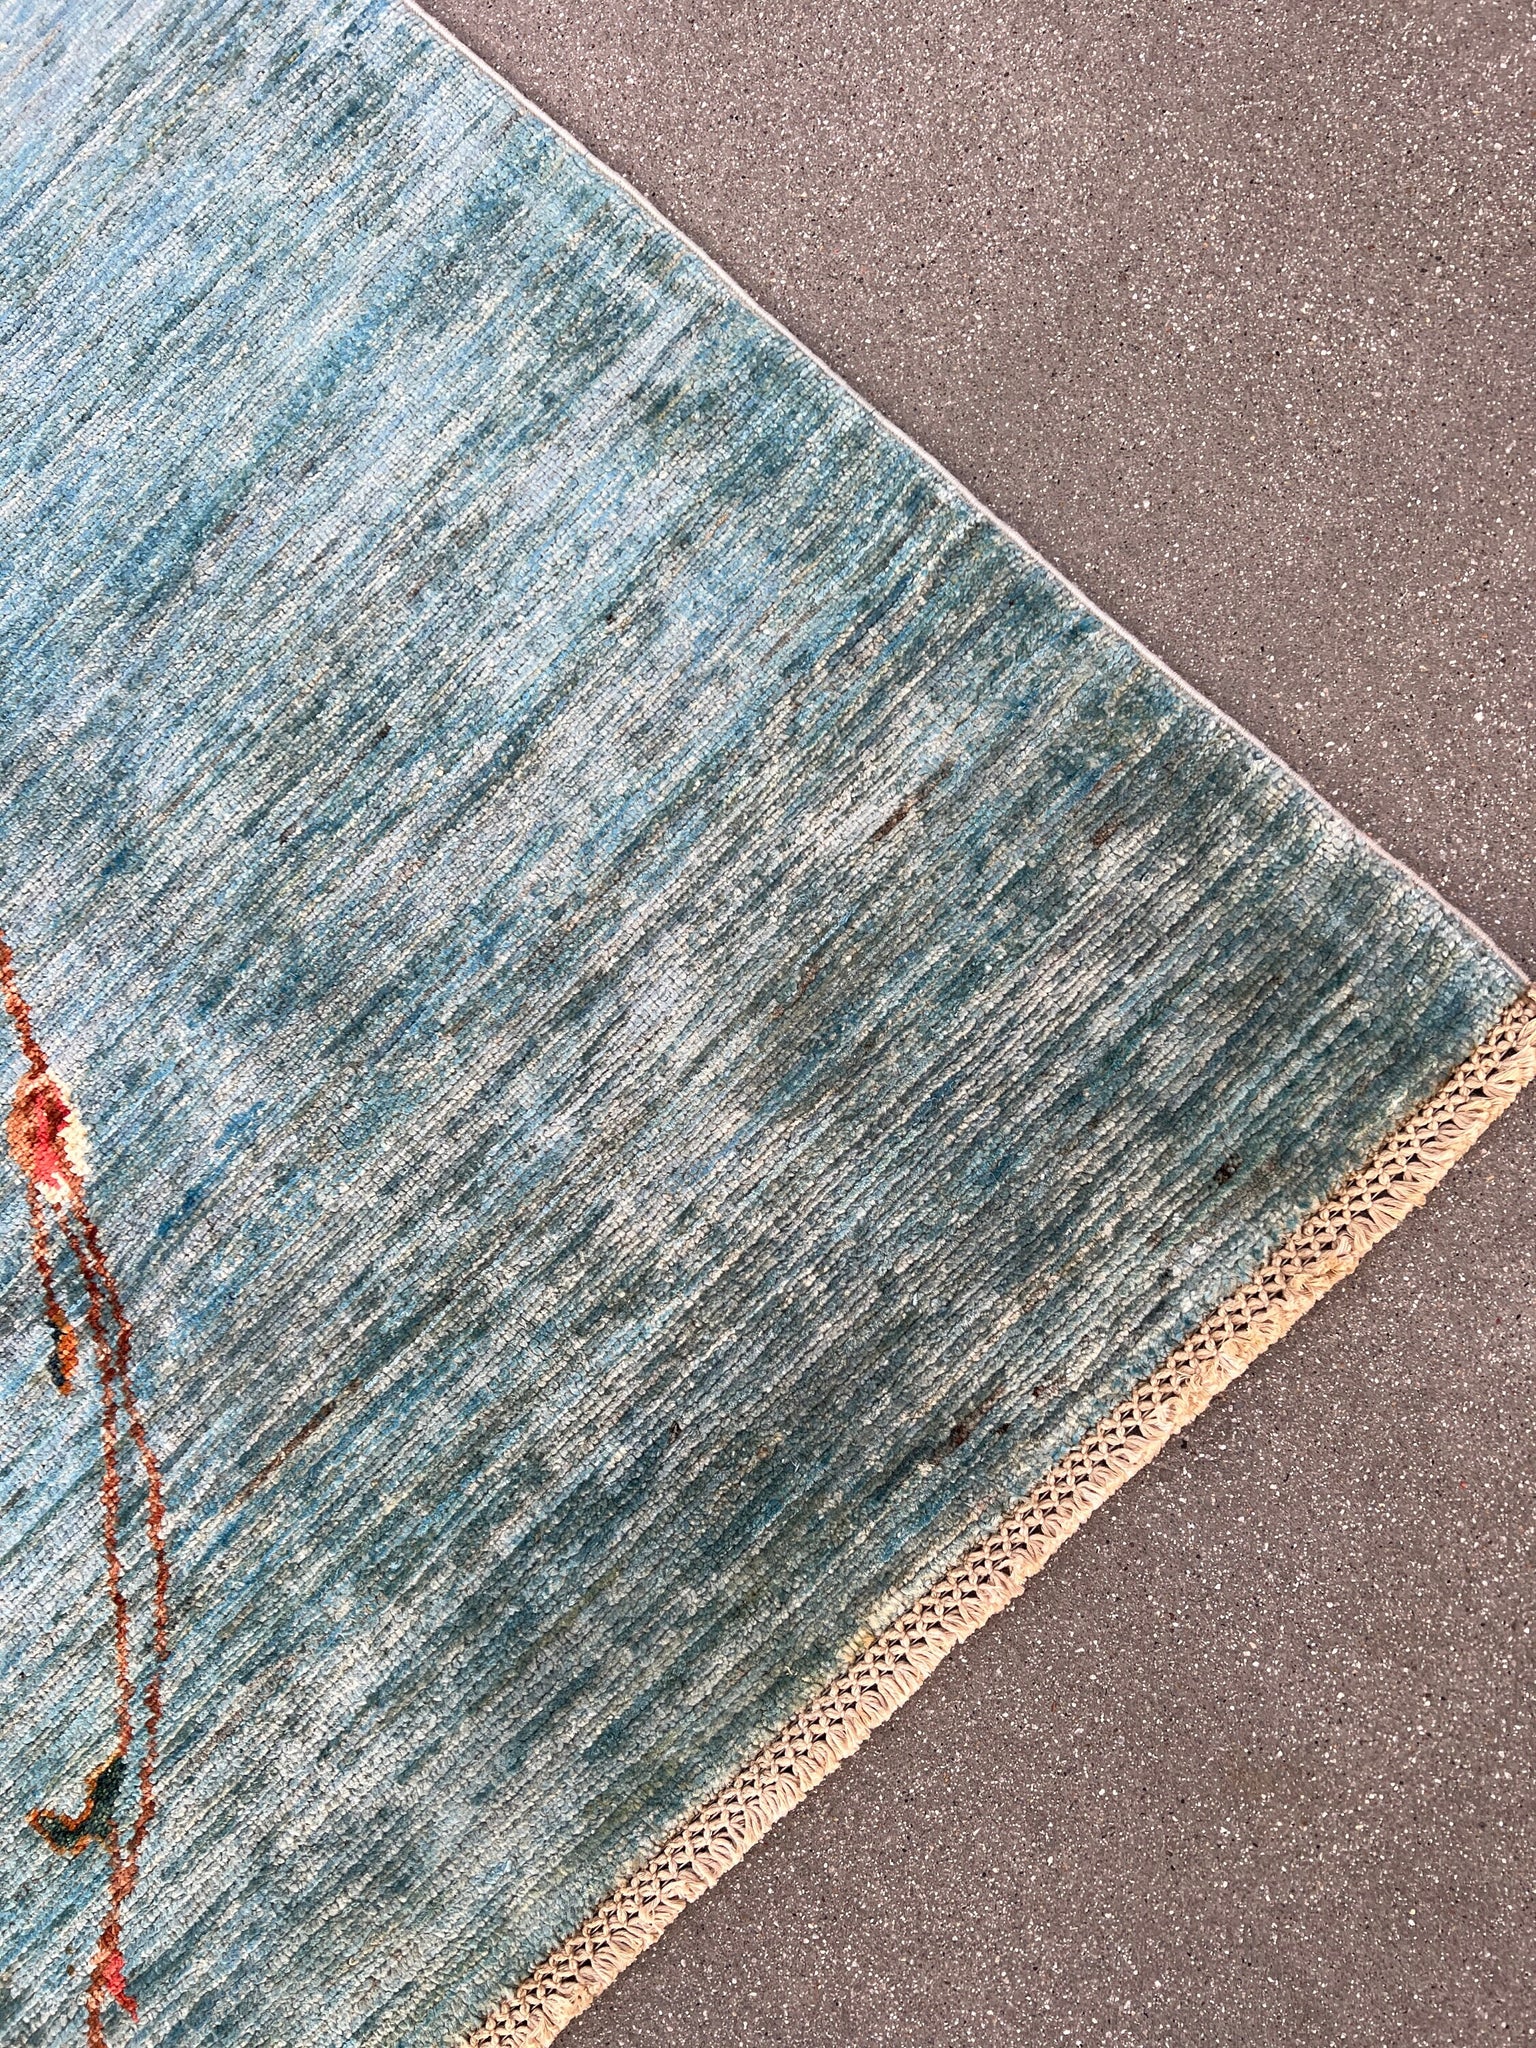 5x7 (150x215) Fair Trade Handmade Afghan Rug | Turquoise Teal Burnt Orange Cream Beige Black Blood Red Yellow | Hand Knotted Persian Wool